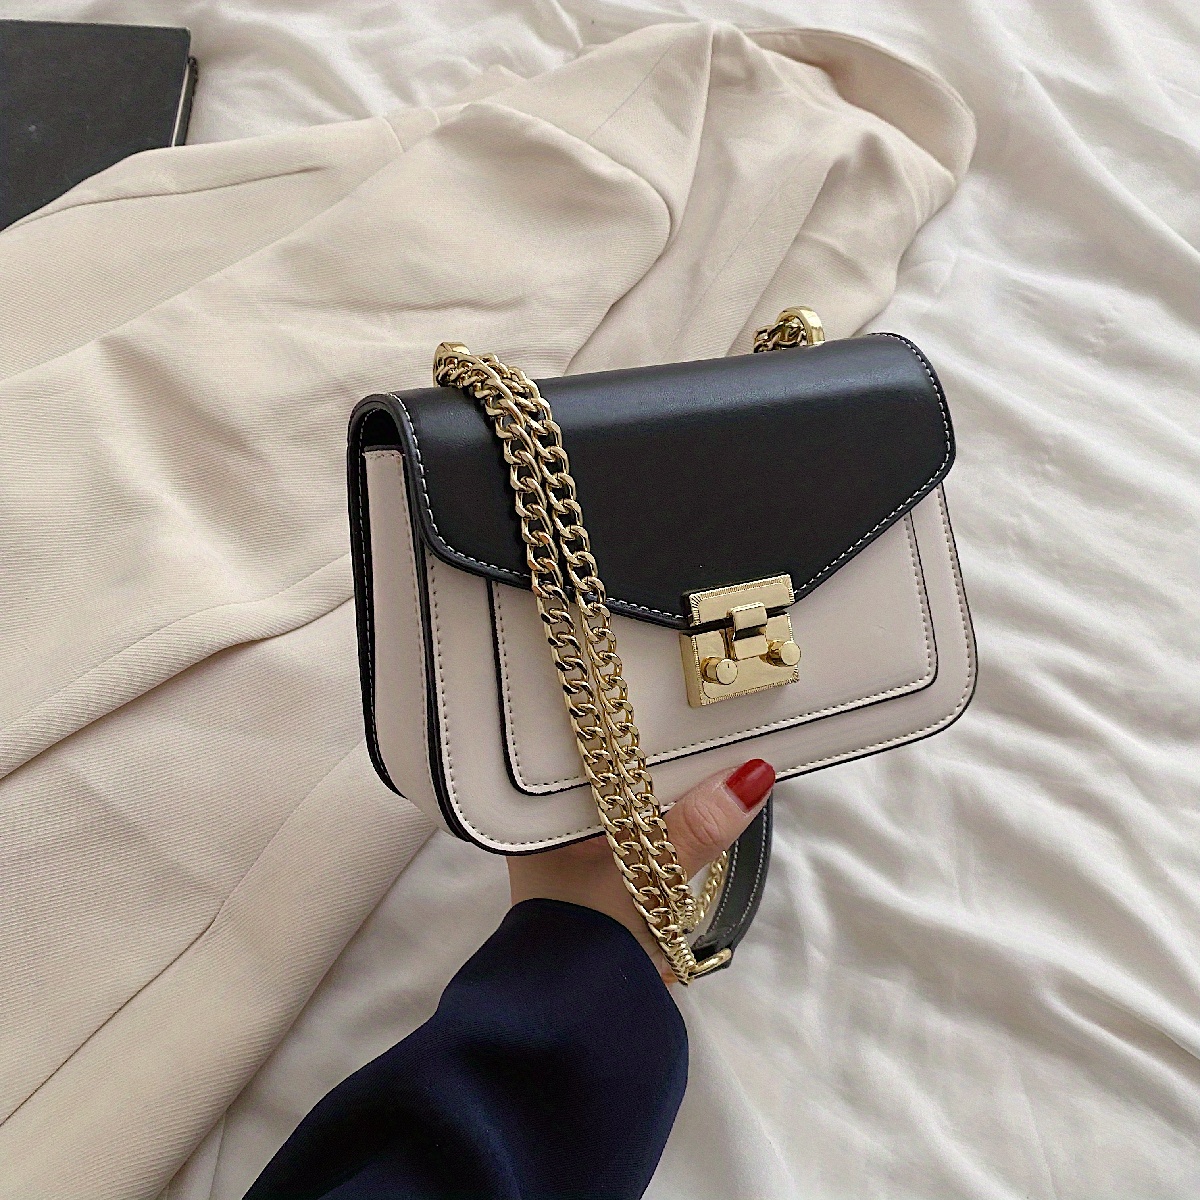 WHITE CROSSBODY BAG WITH GOLD CHAIN